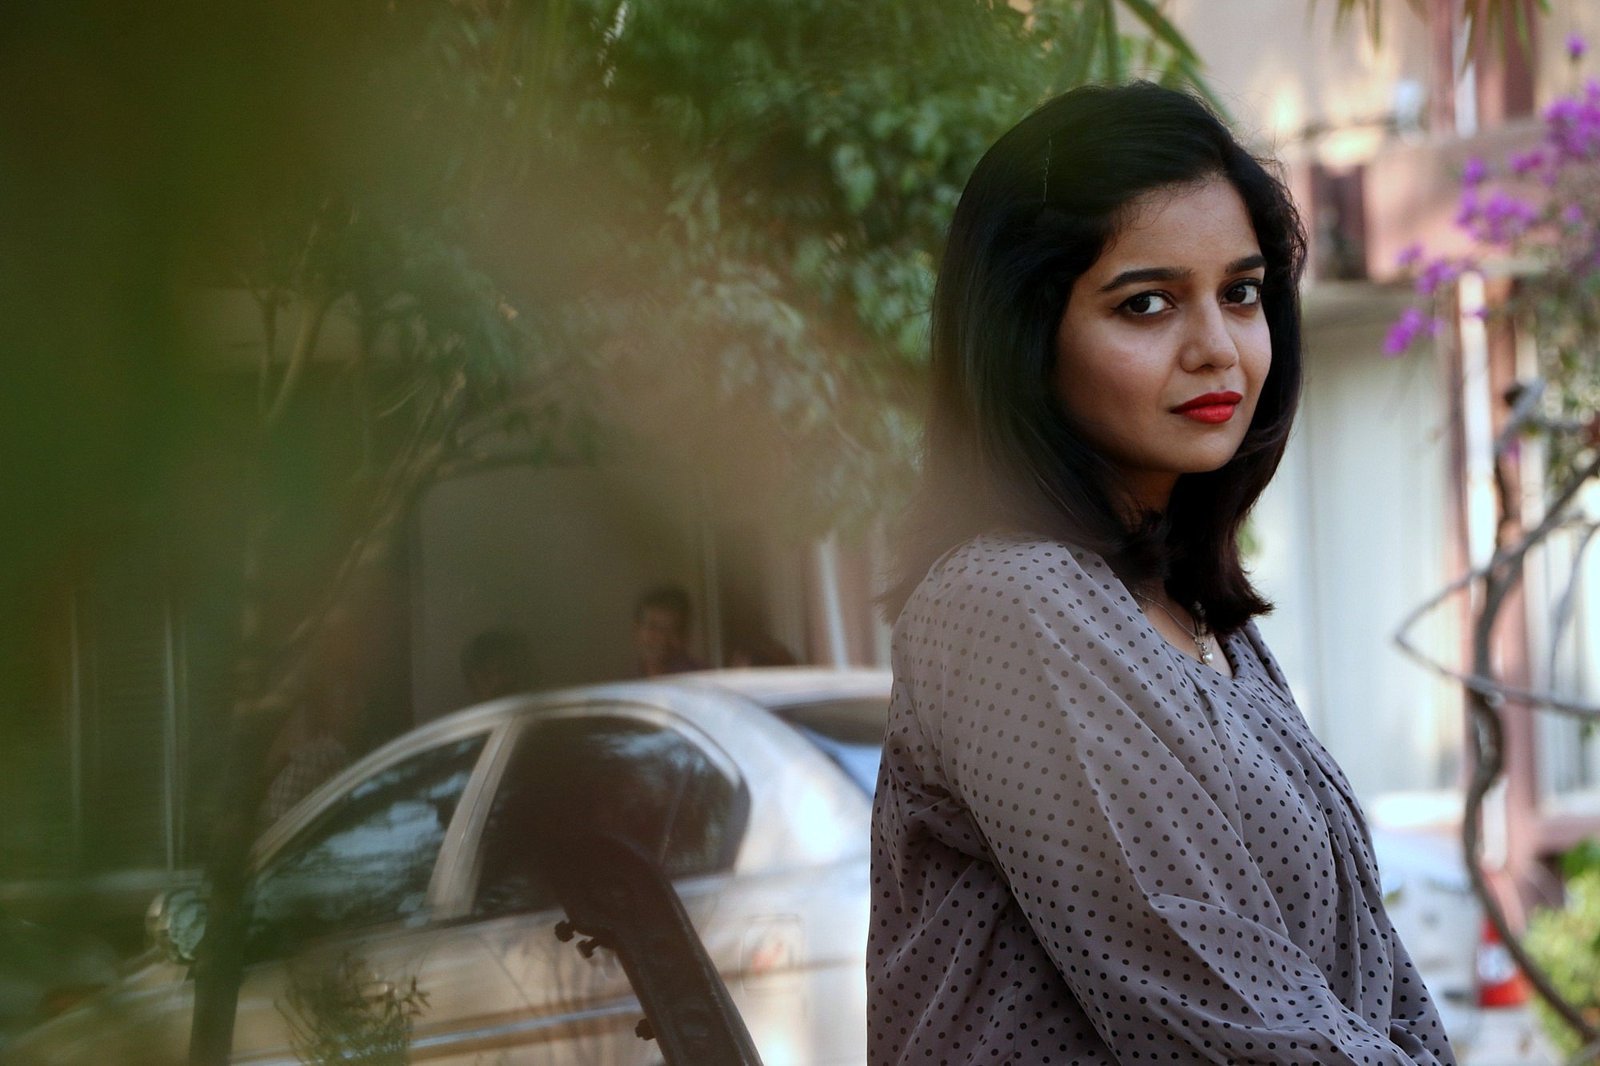 Swathi Reddy, Swathi Reddy Wiki, Swathi Reddy Biography, Swathi Reddy Age, Swathi Reddy Height, Swathi Reddy Weight, Swathi Reddy Boyfriend, Swathi Reddy Family, Biography